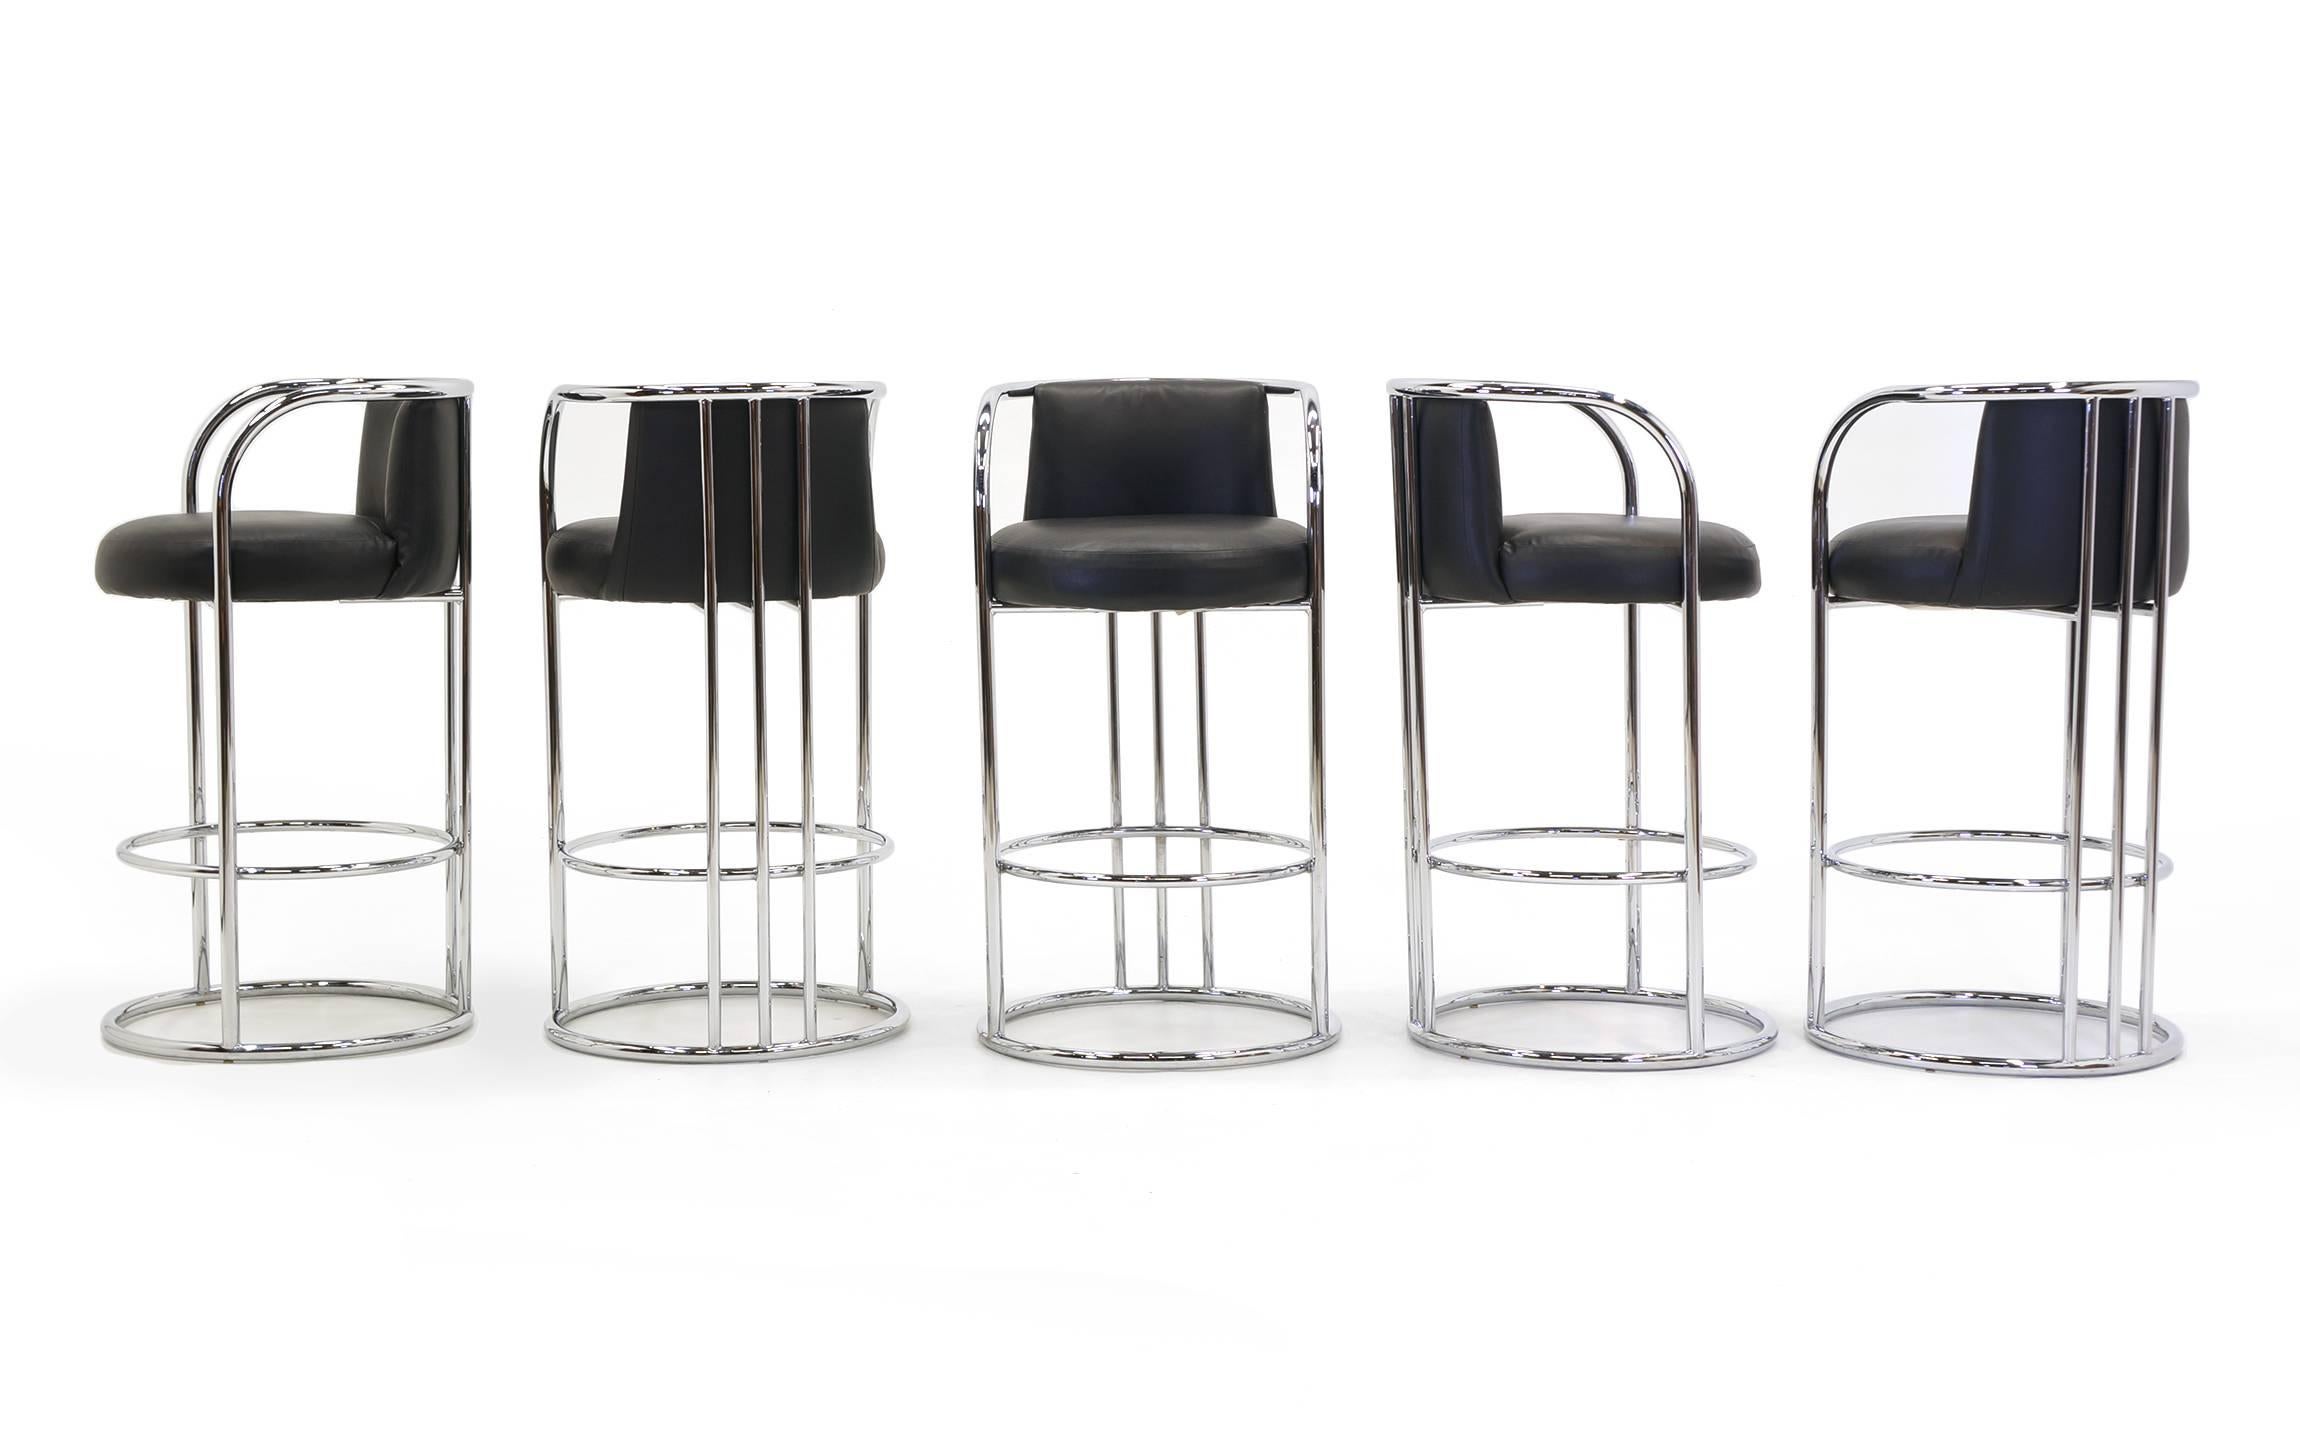 Rare original Milo Baughman design bar stools with chrome frames and black vinyl seats. Retain the Thayer Coggin labels stating Milo Baughman design. Very comfortable with both backrests and arms. Five total. Buy any number.